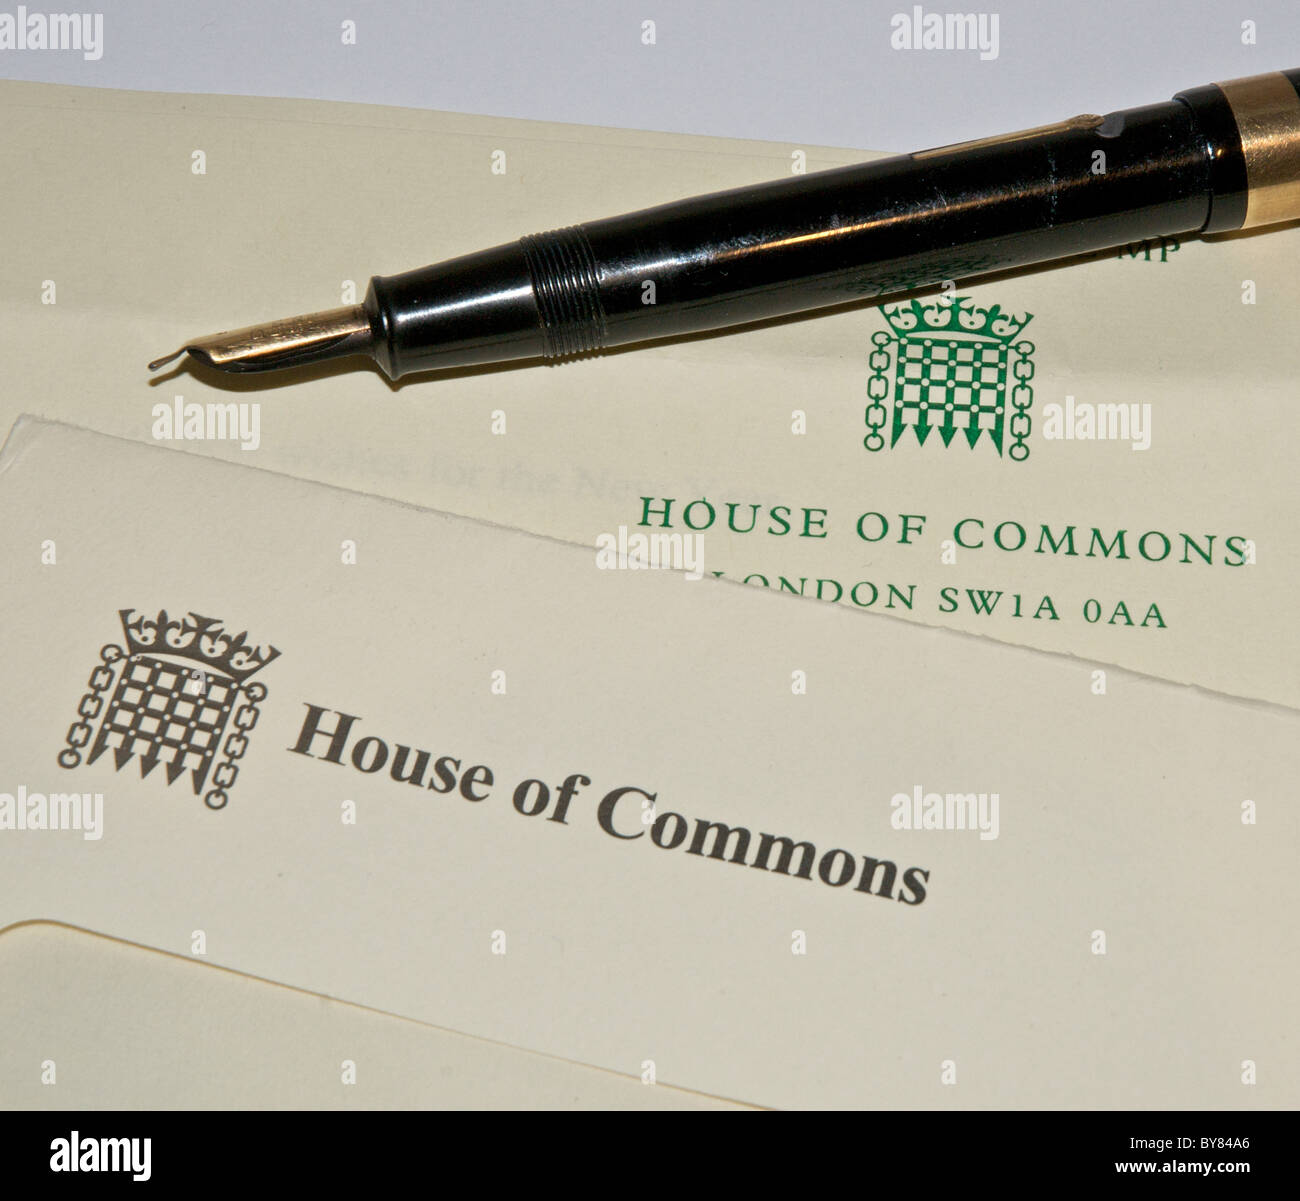 House of Commons stationery letterhead and envelope Stock Photo